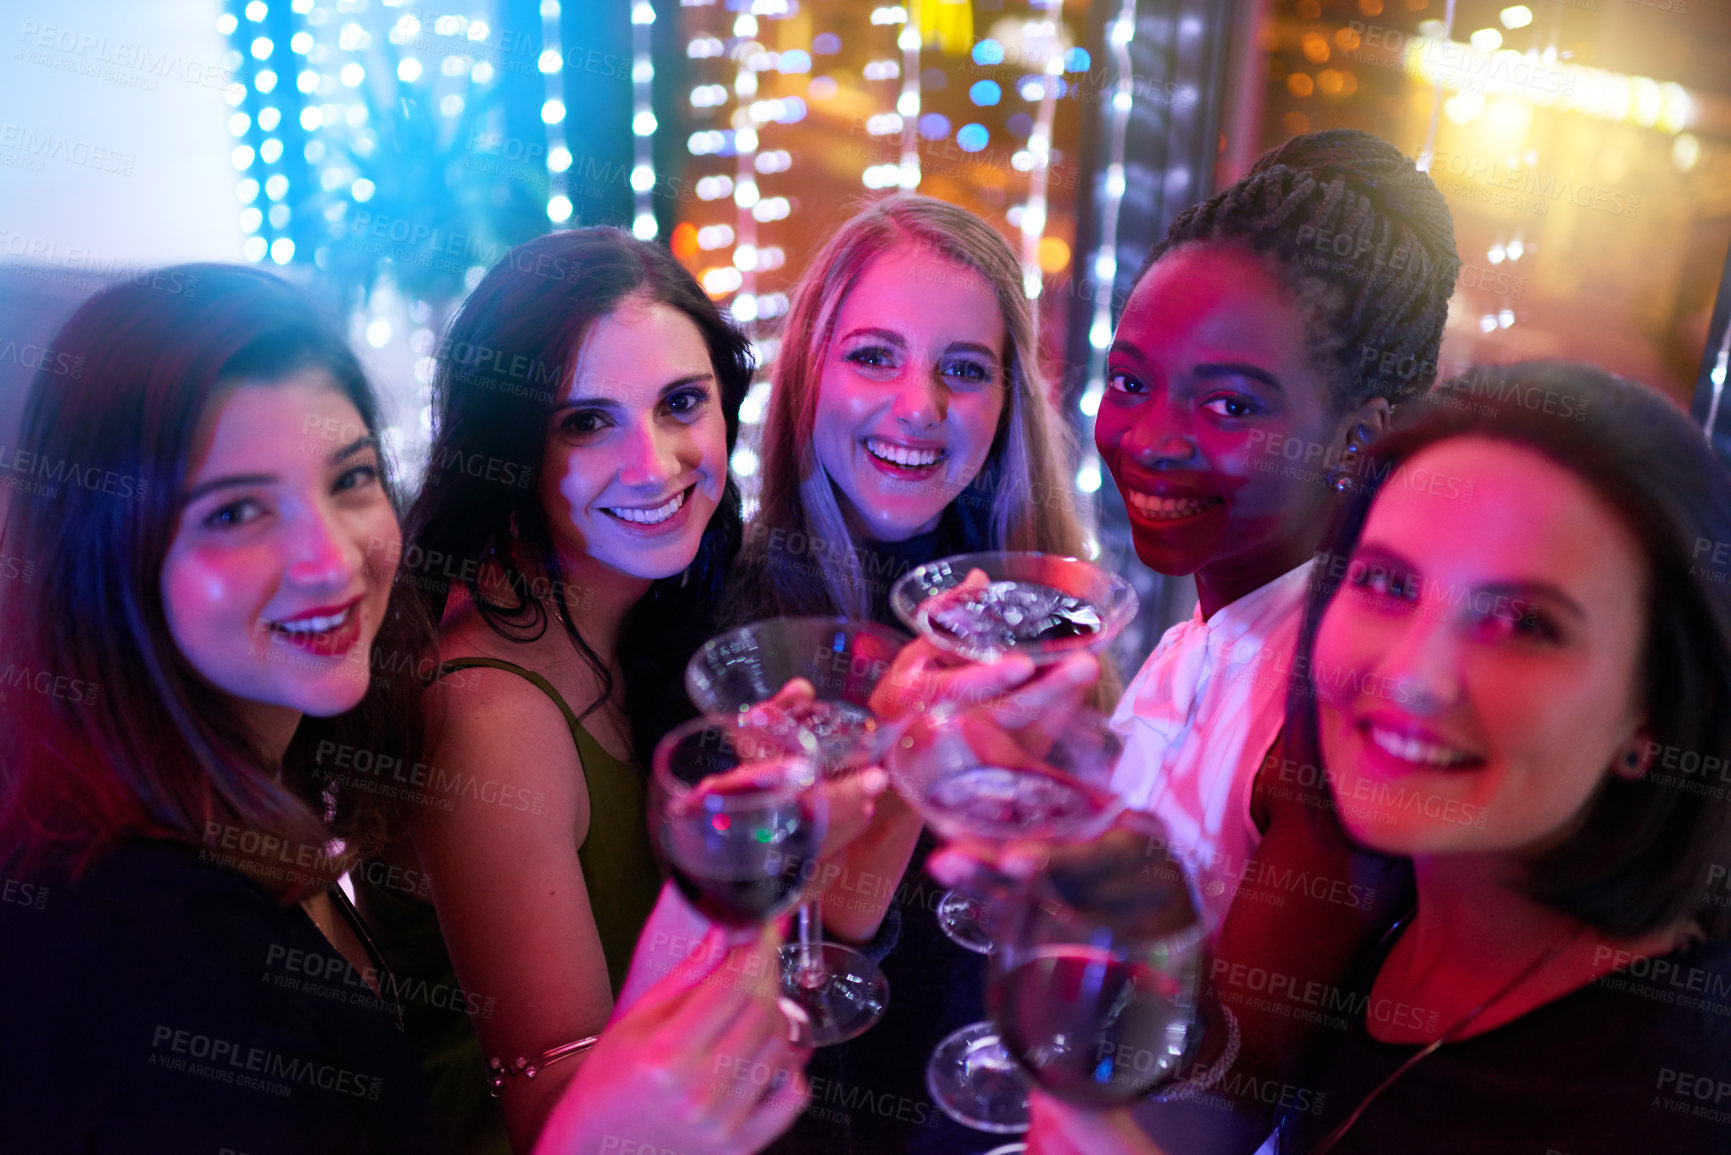 Buy stock photo Portrait of a group of young women drinking cocktails at a party